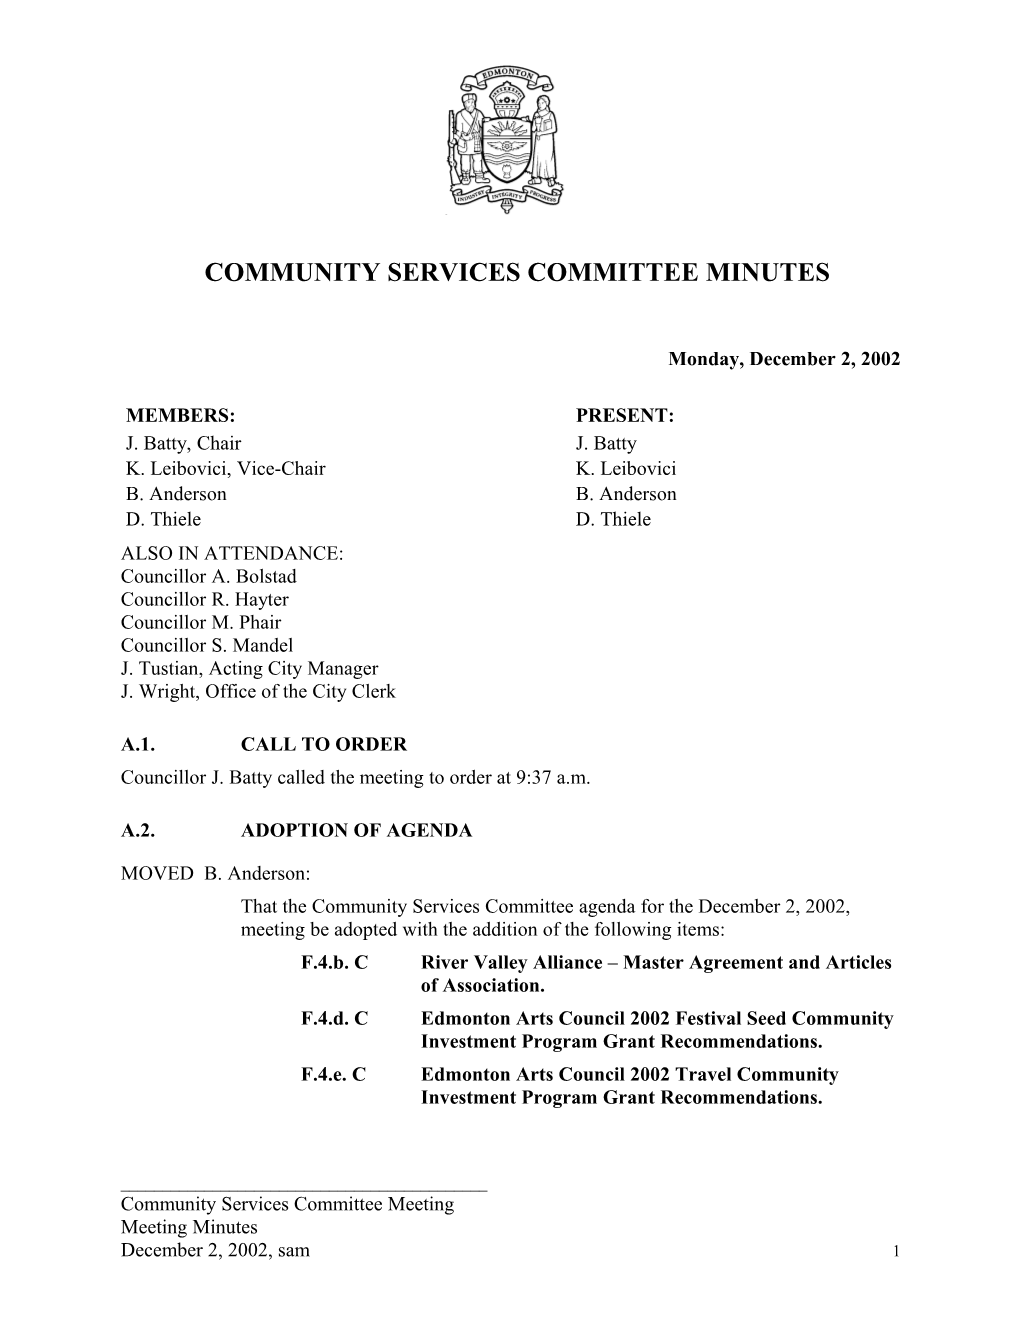 Minutes for Community Services Committee December 2, 2002 Meeting